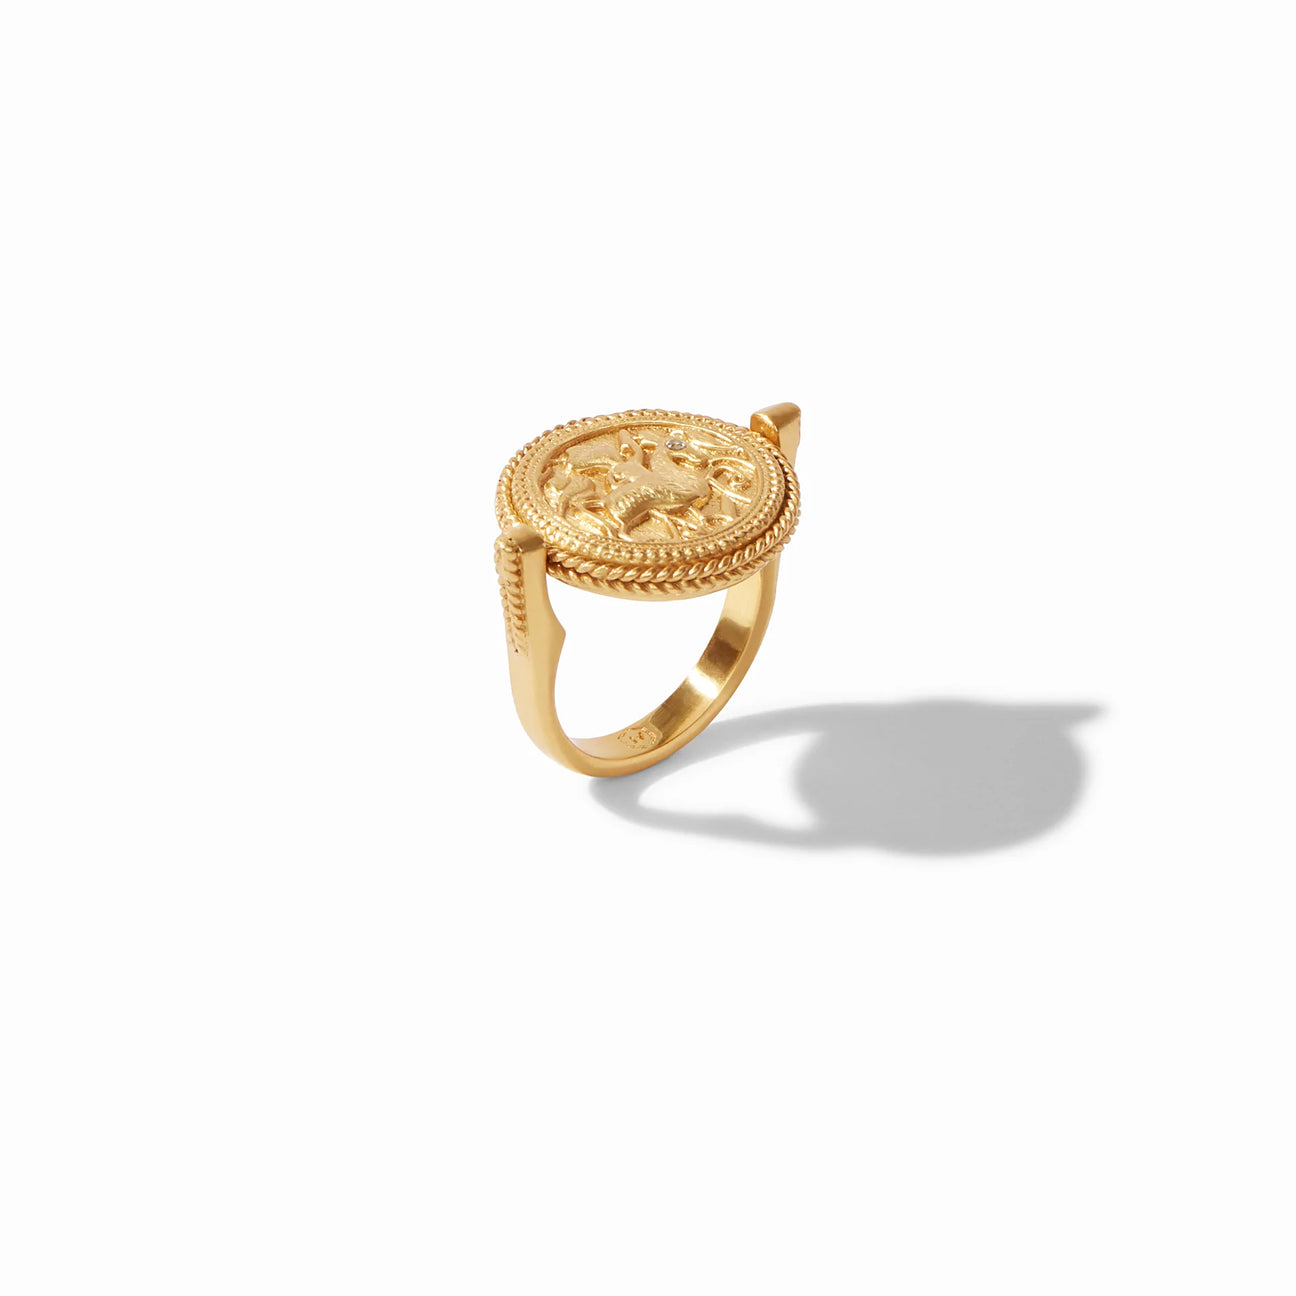 Coin Revolving Ring - Muse Shoe Studio